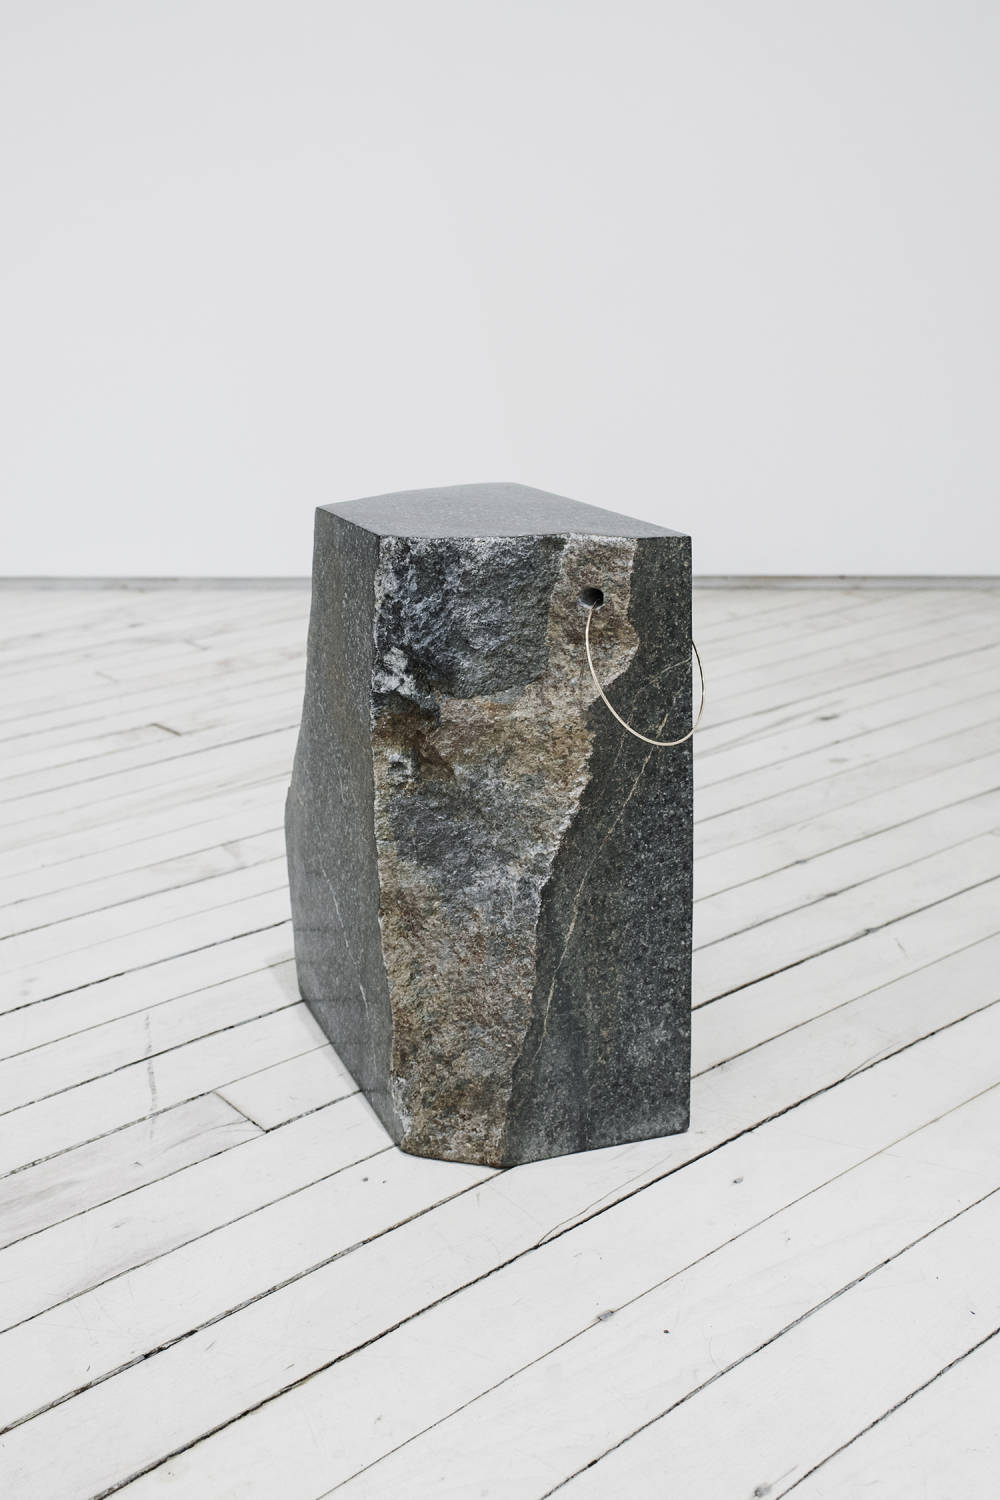 A large stone with natural edges sits on a wooden gallery floor, the stone has a hole drilled through the top right corner where a large hoop earring pierces the stone.